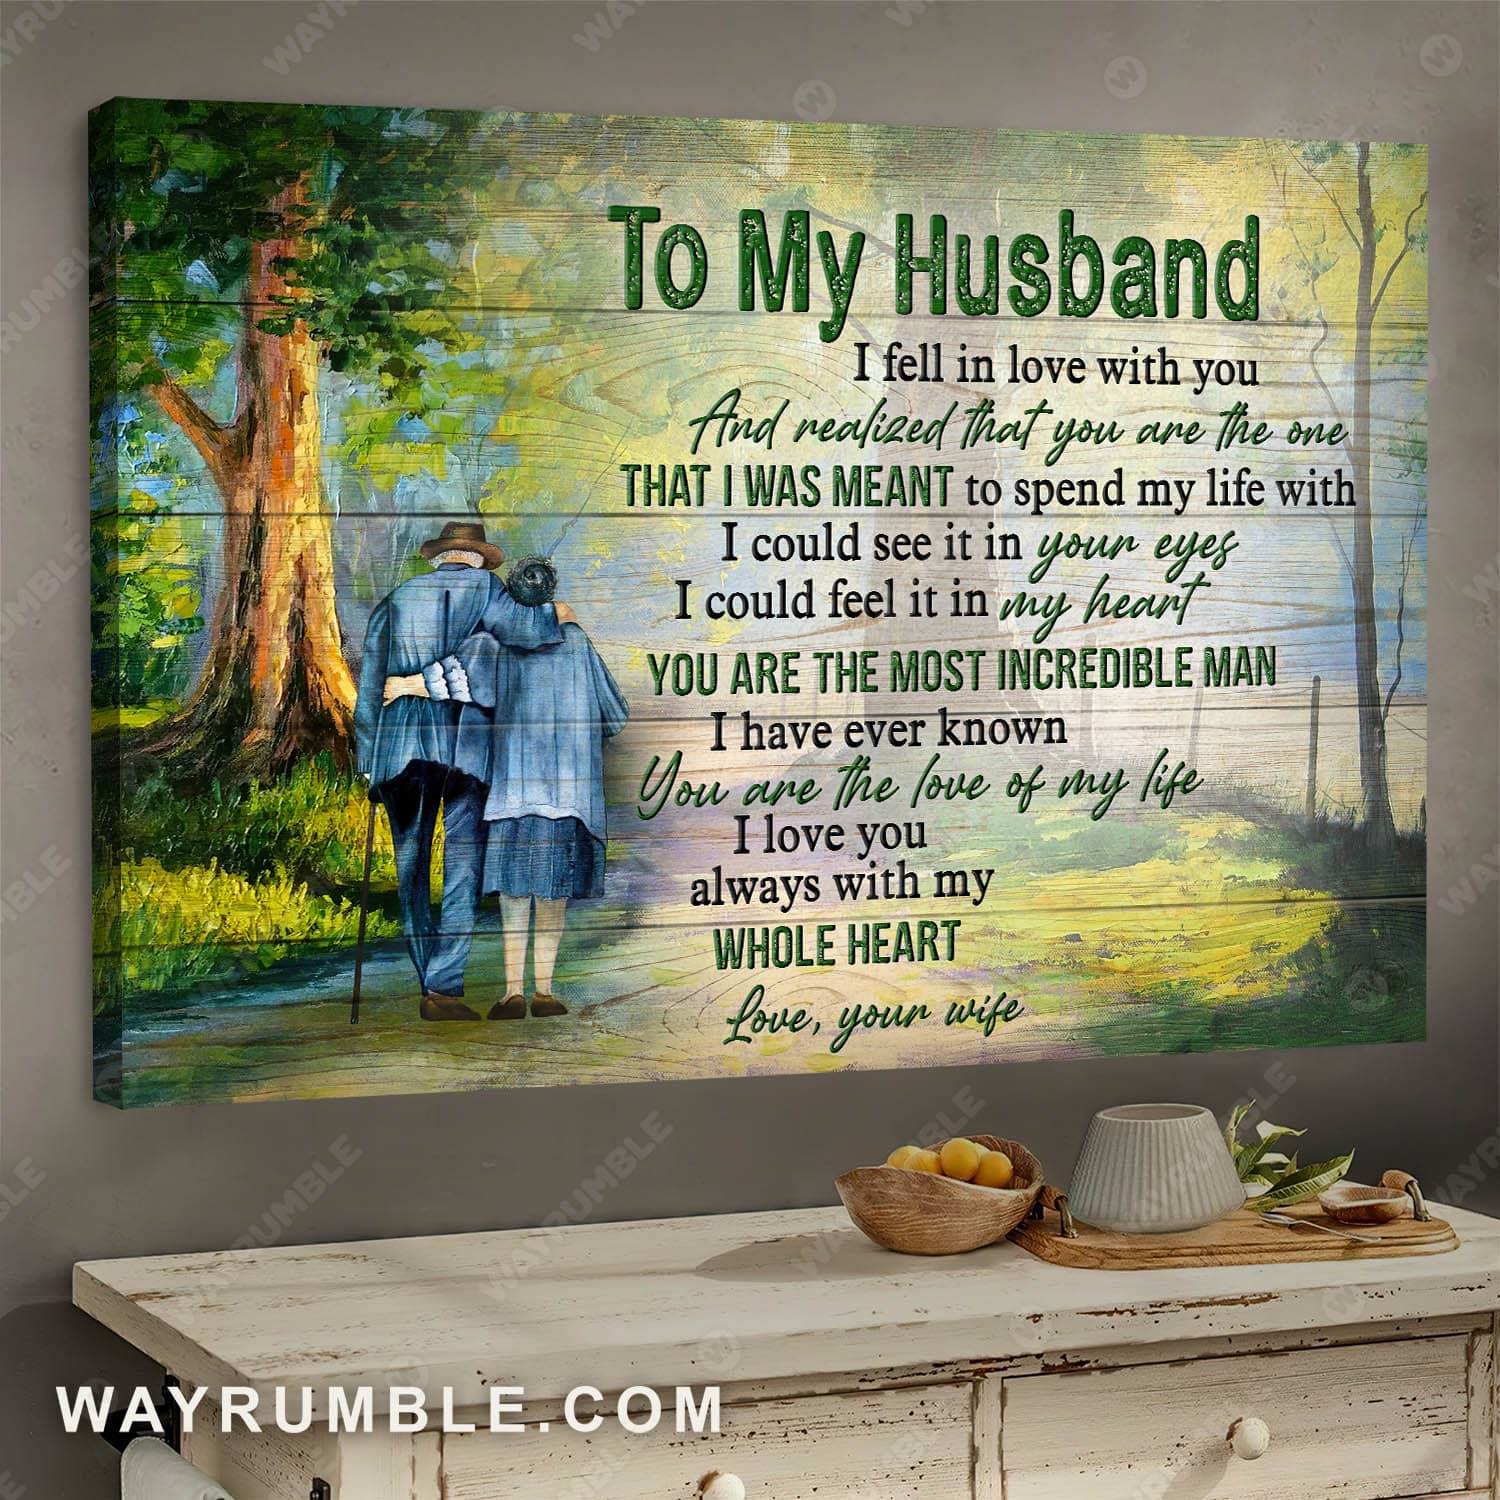 To my husband, Old couple in love, Walking in the forest, I love you with my whole heart - Couple Landscape Canvas Prints, Wall Art